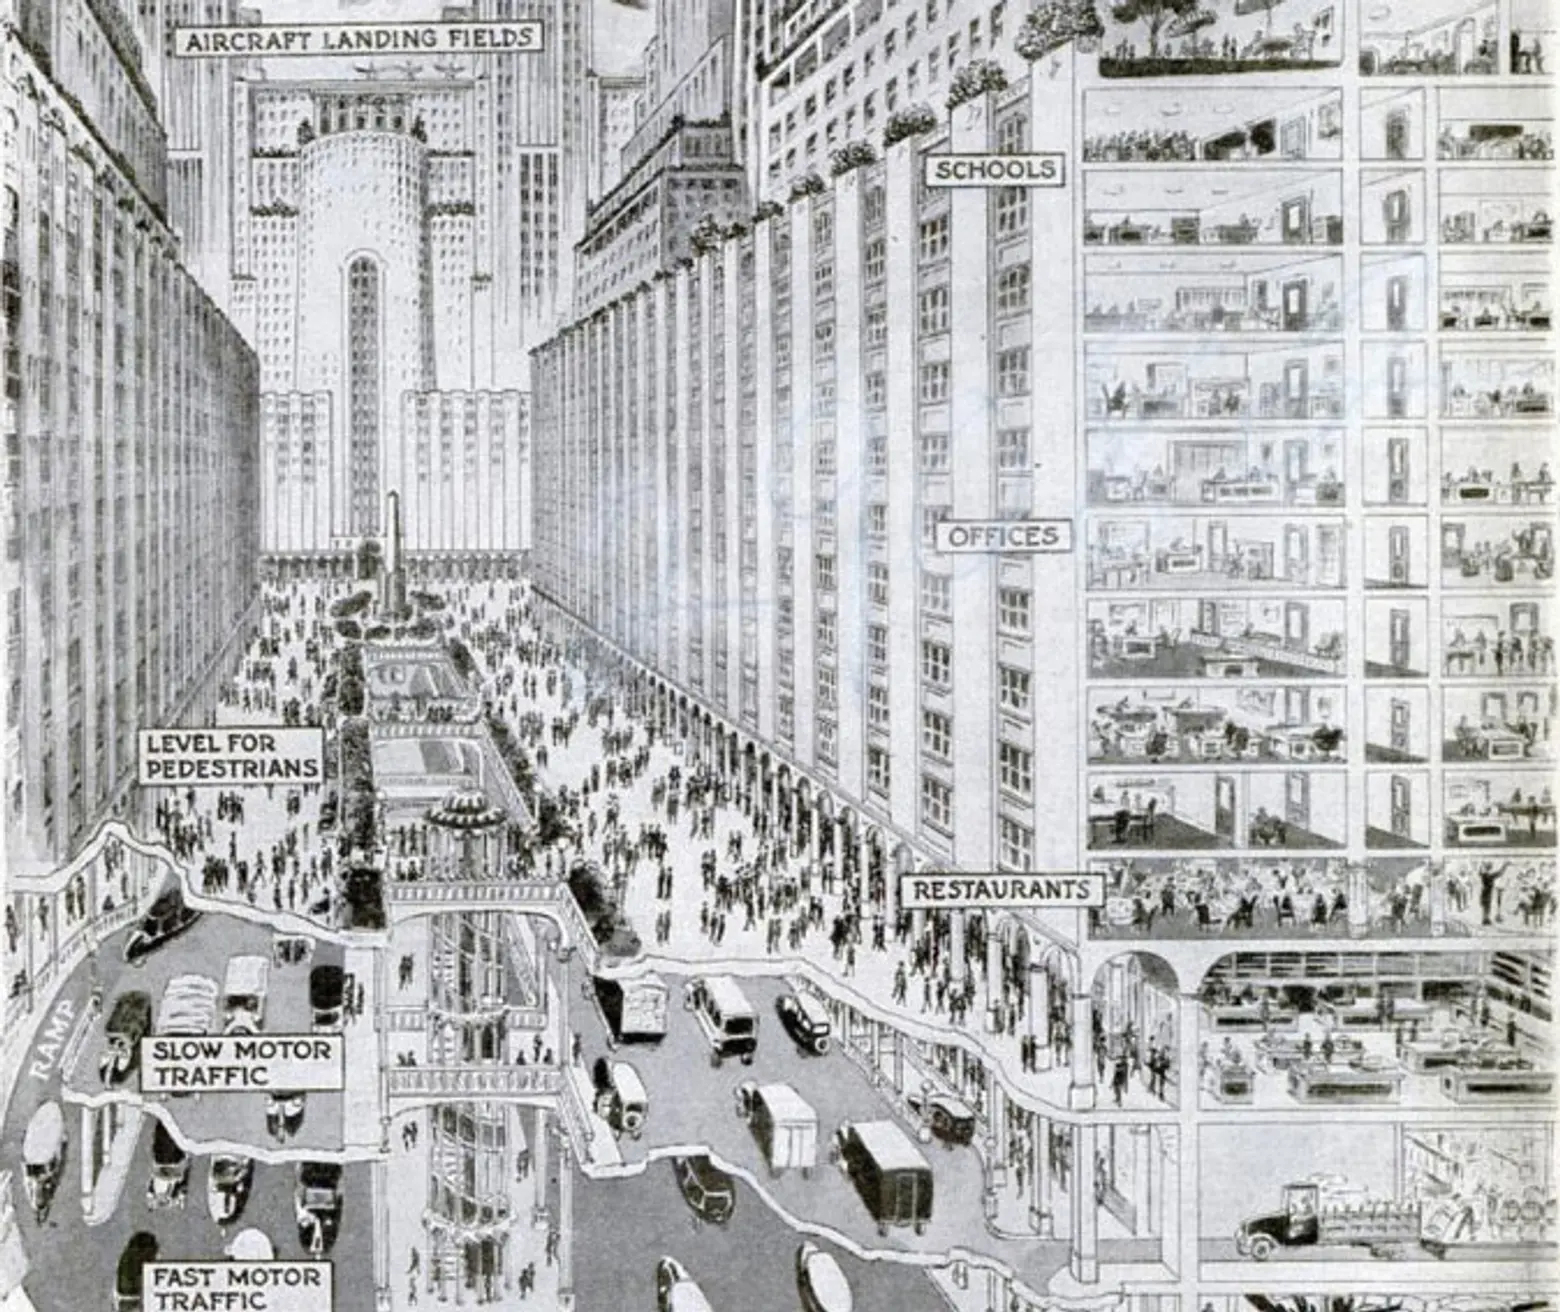 1920s Popular Science Illustration Stacks the Future American City Like a Layered Cake